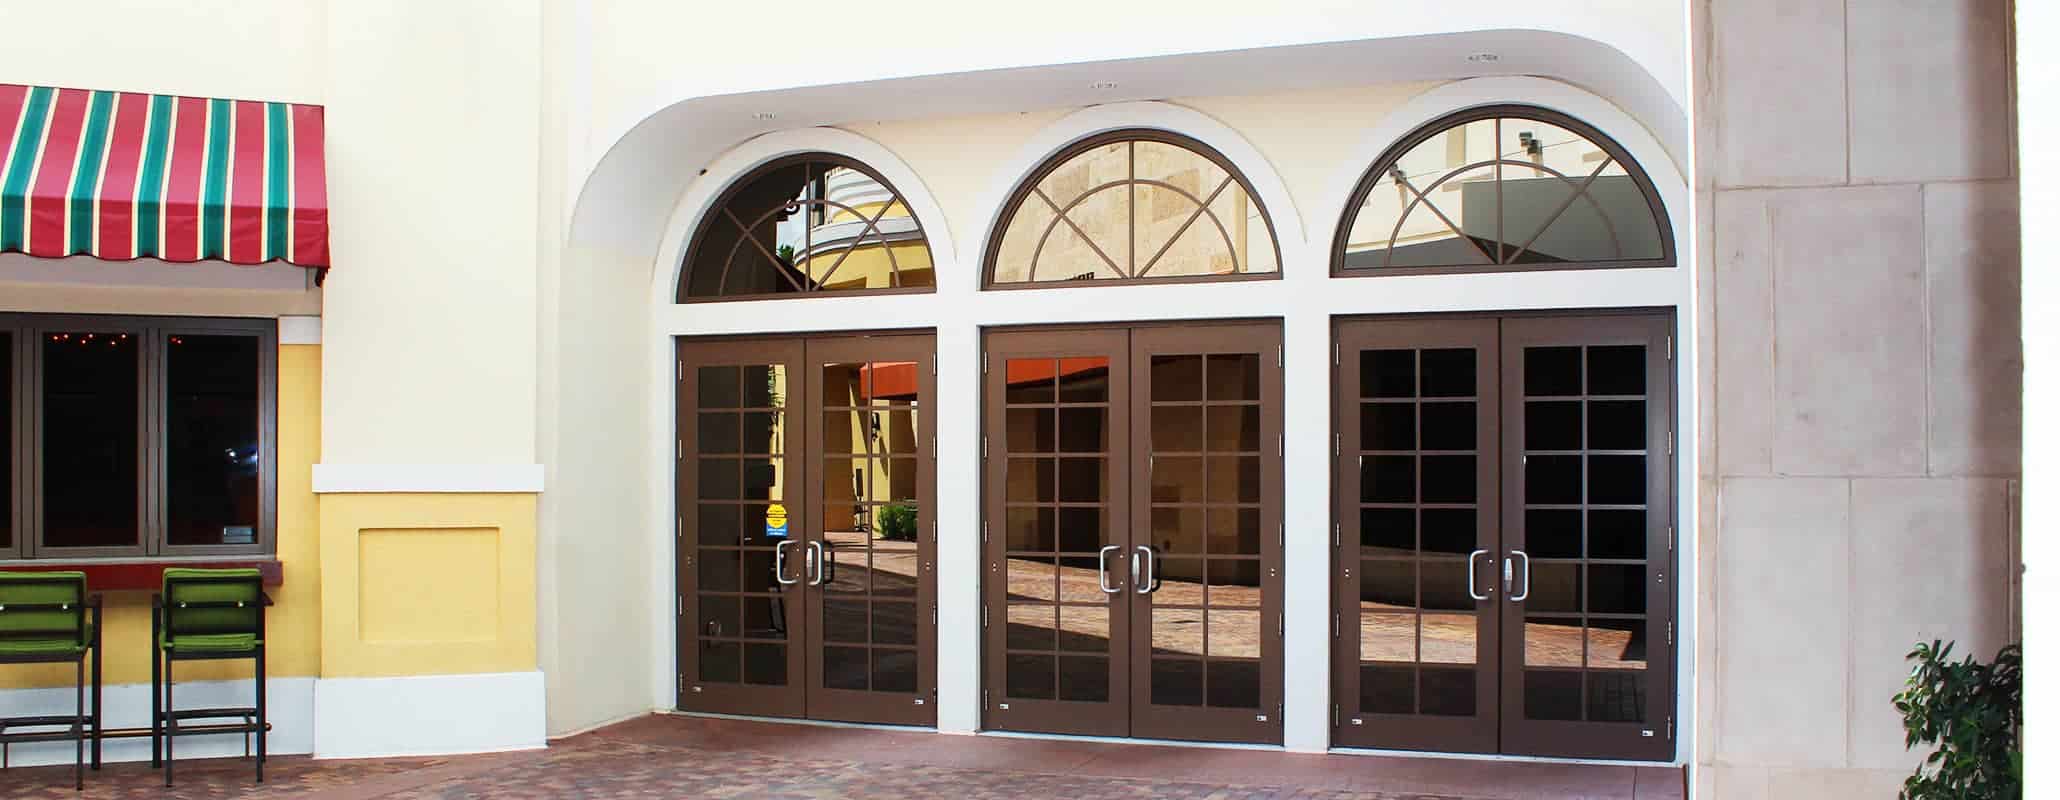 An exterior view of three Aldora impact glass doors with brick paved walkway in front and seating at the wall on the left.